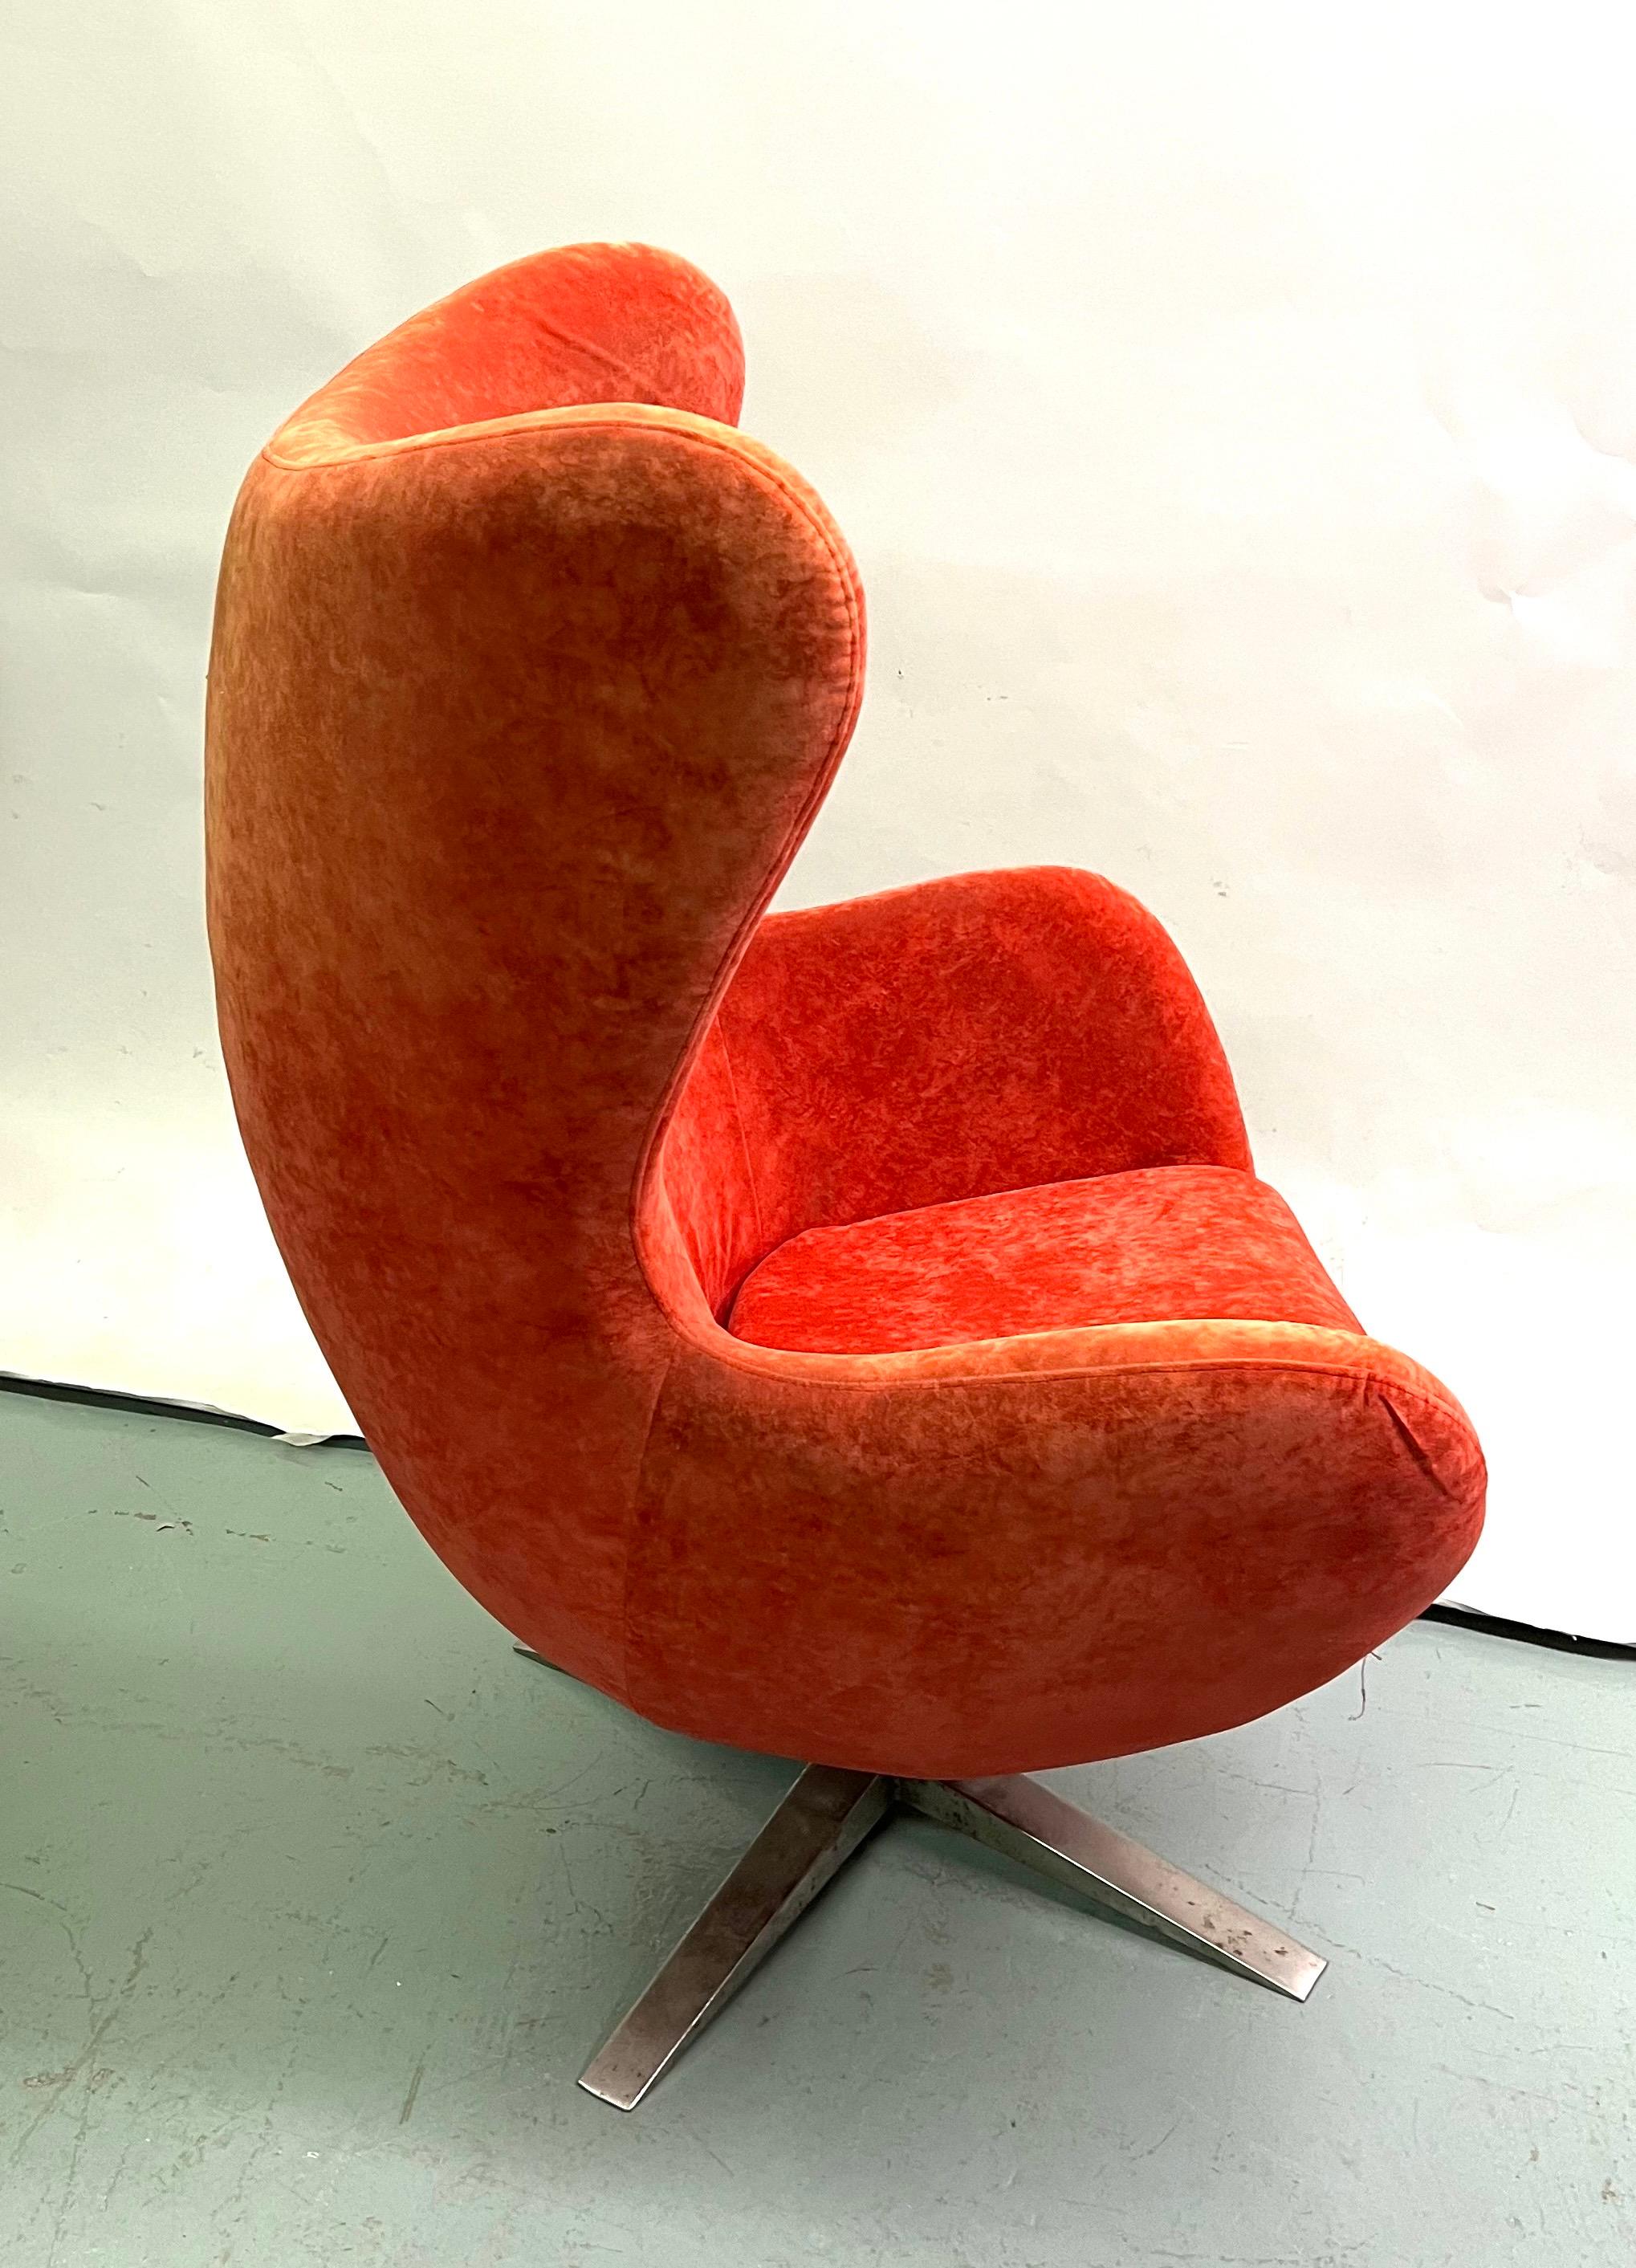 Rare Set of 3 Danish Mid-Century Organic Modern Lounge / Club or Armchairs attributed to Arne Jacobsen and Fritz Hansen. 2 of the pieces are in the original 1960's leather and the 3rd piece is in brushed red orange corduroy.  The pieces have been